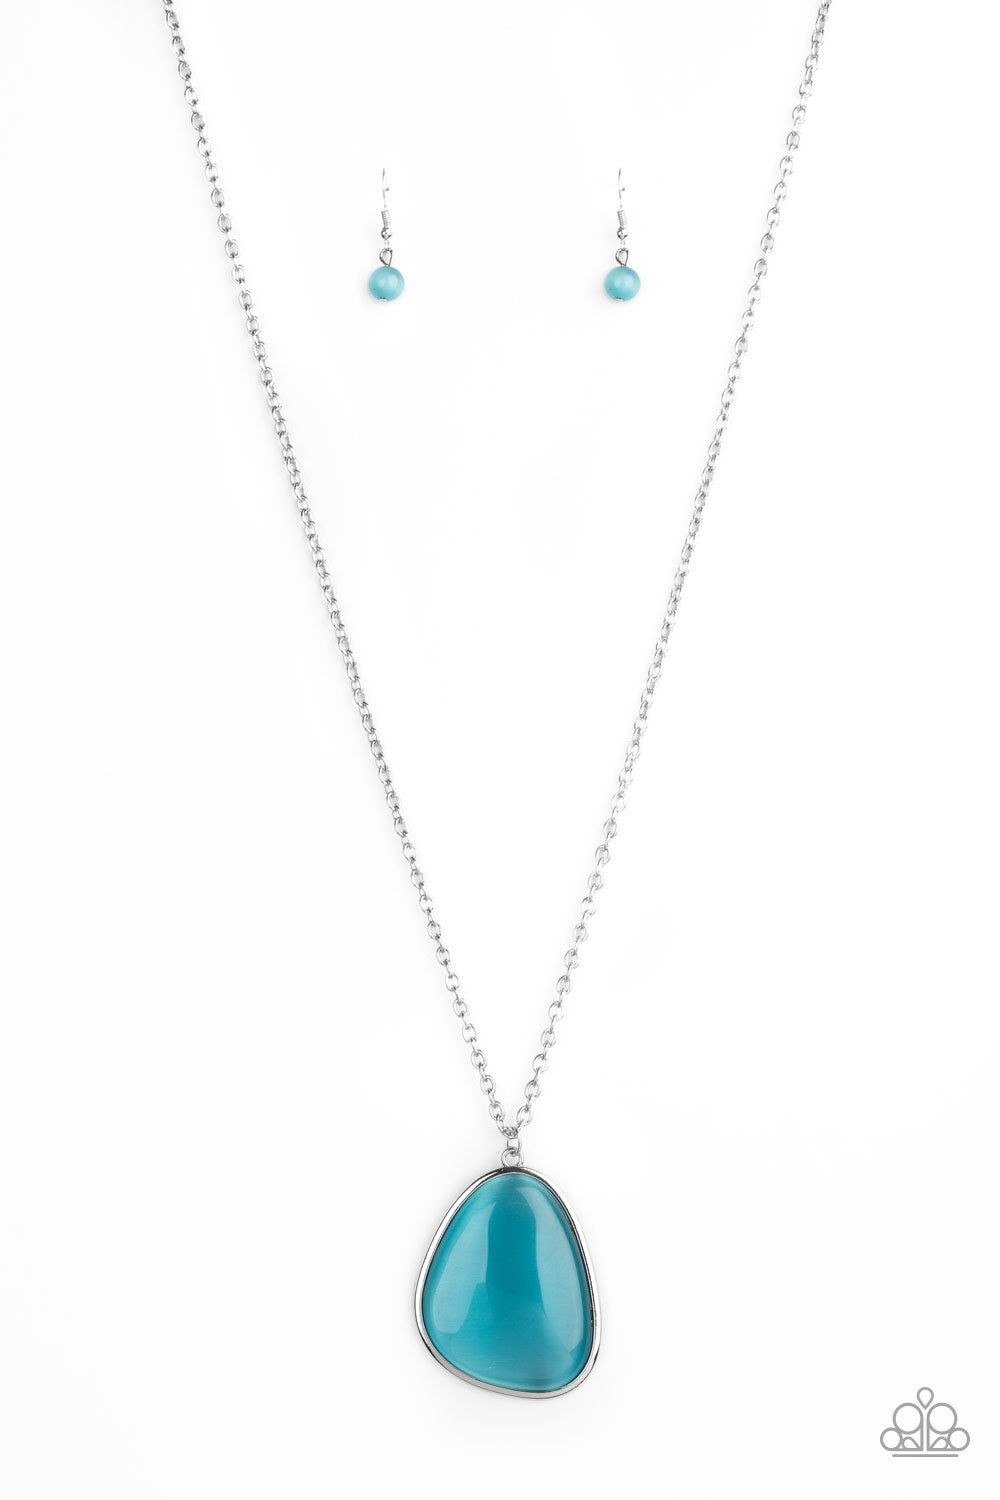 Paparazzi Necklace - Ethereal Experience - Blue